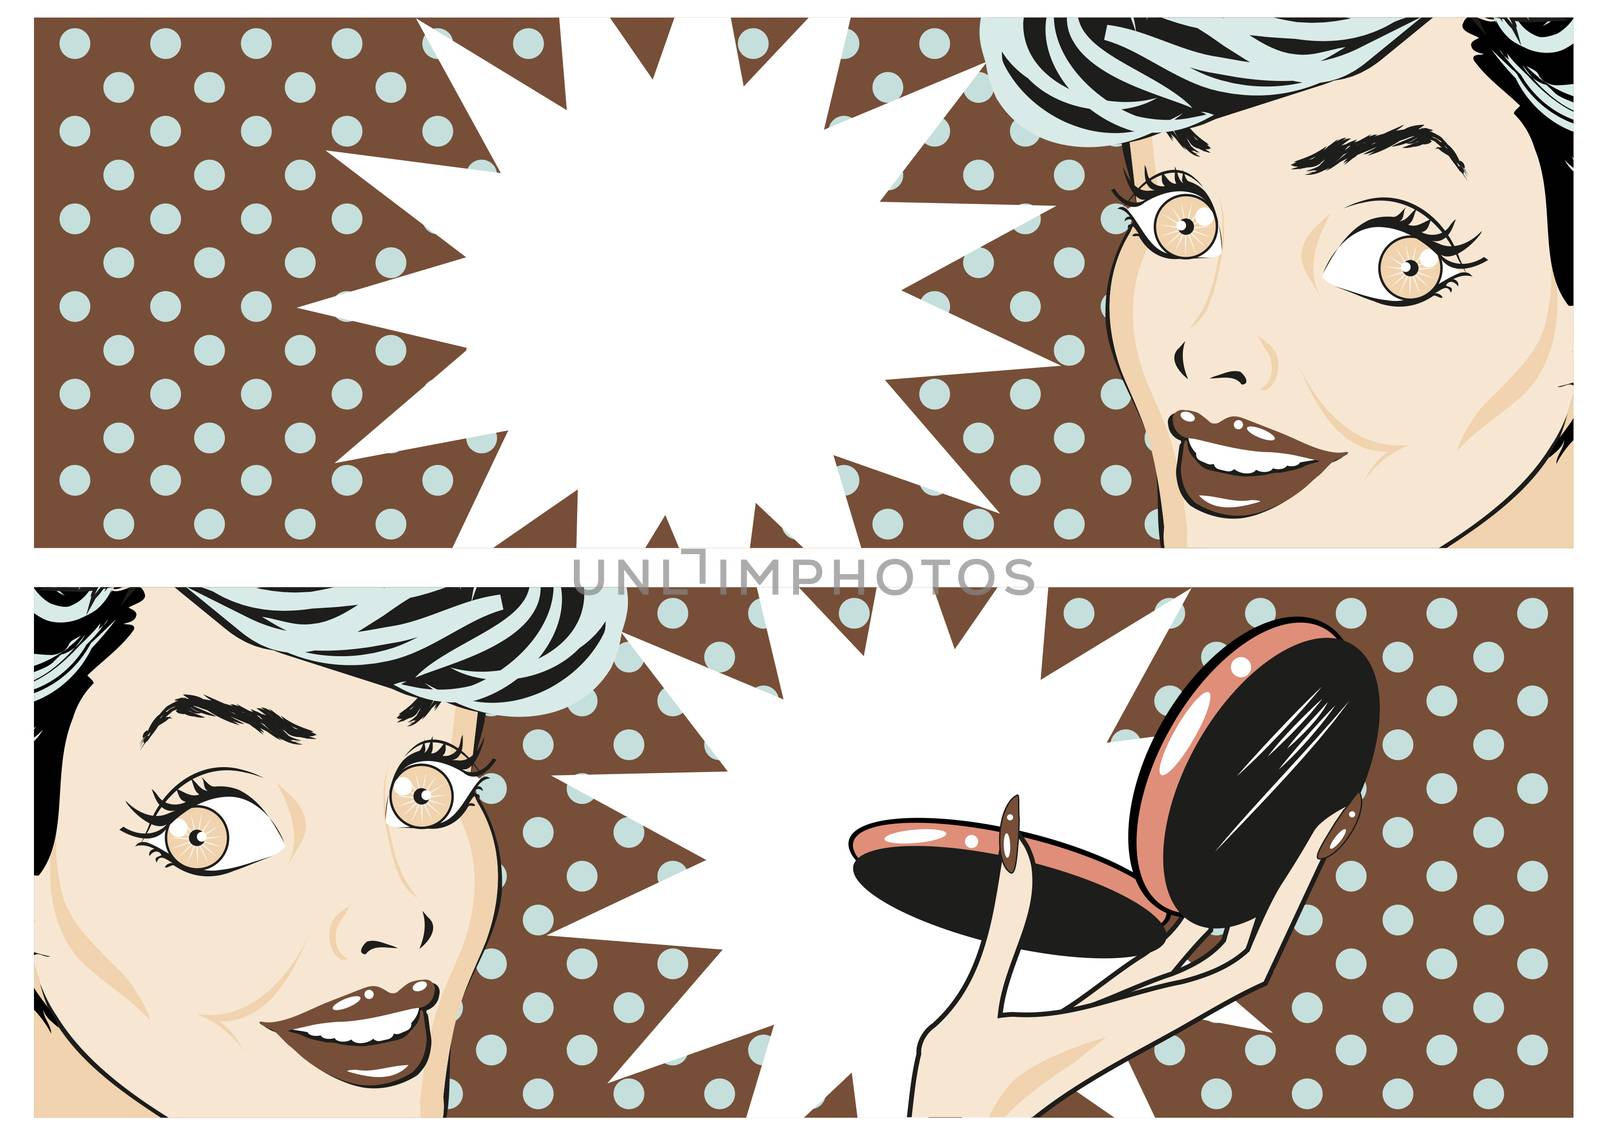 Beauty Pop Art Banners set with retro happy woman face template by IconsJewelry